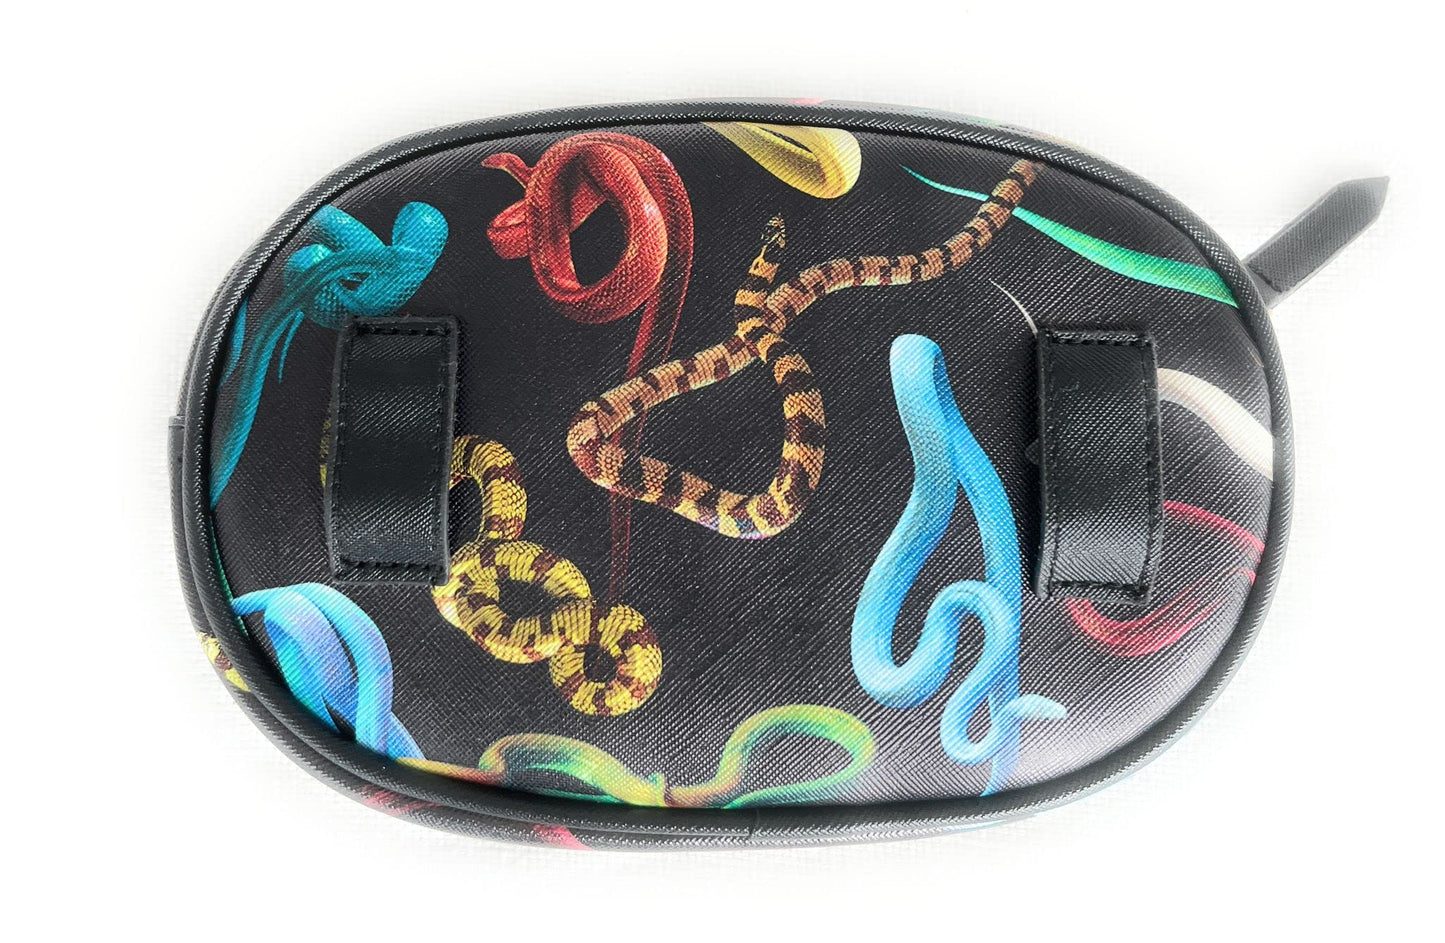 SNAKE waist bag with strap - Toiletpaper line by Seletti